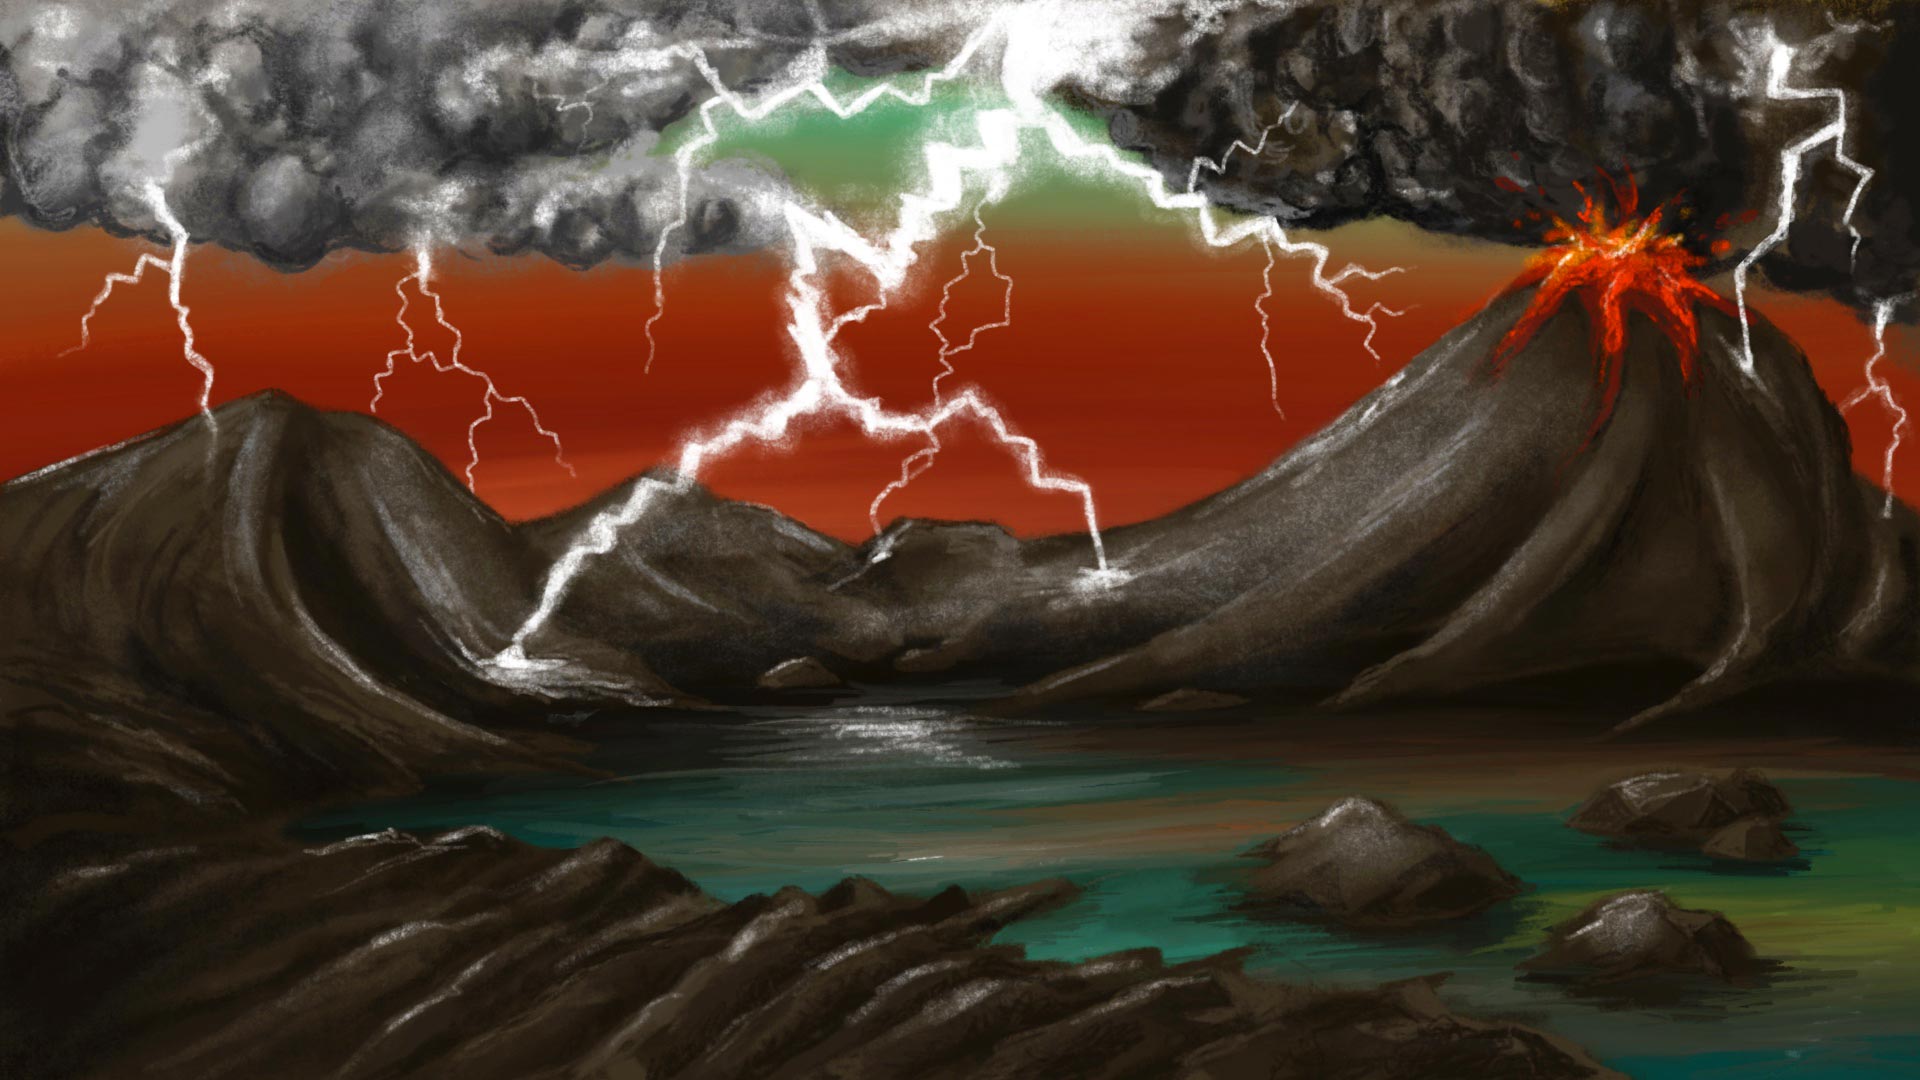 Lightning regions played an important role – just as important as meteorites – in the origin of life on earth